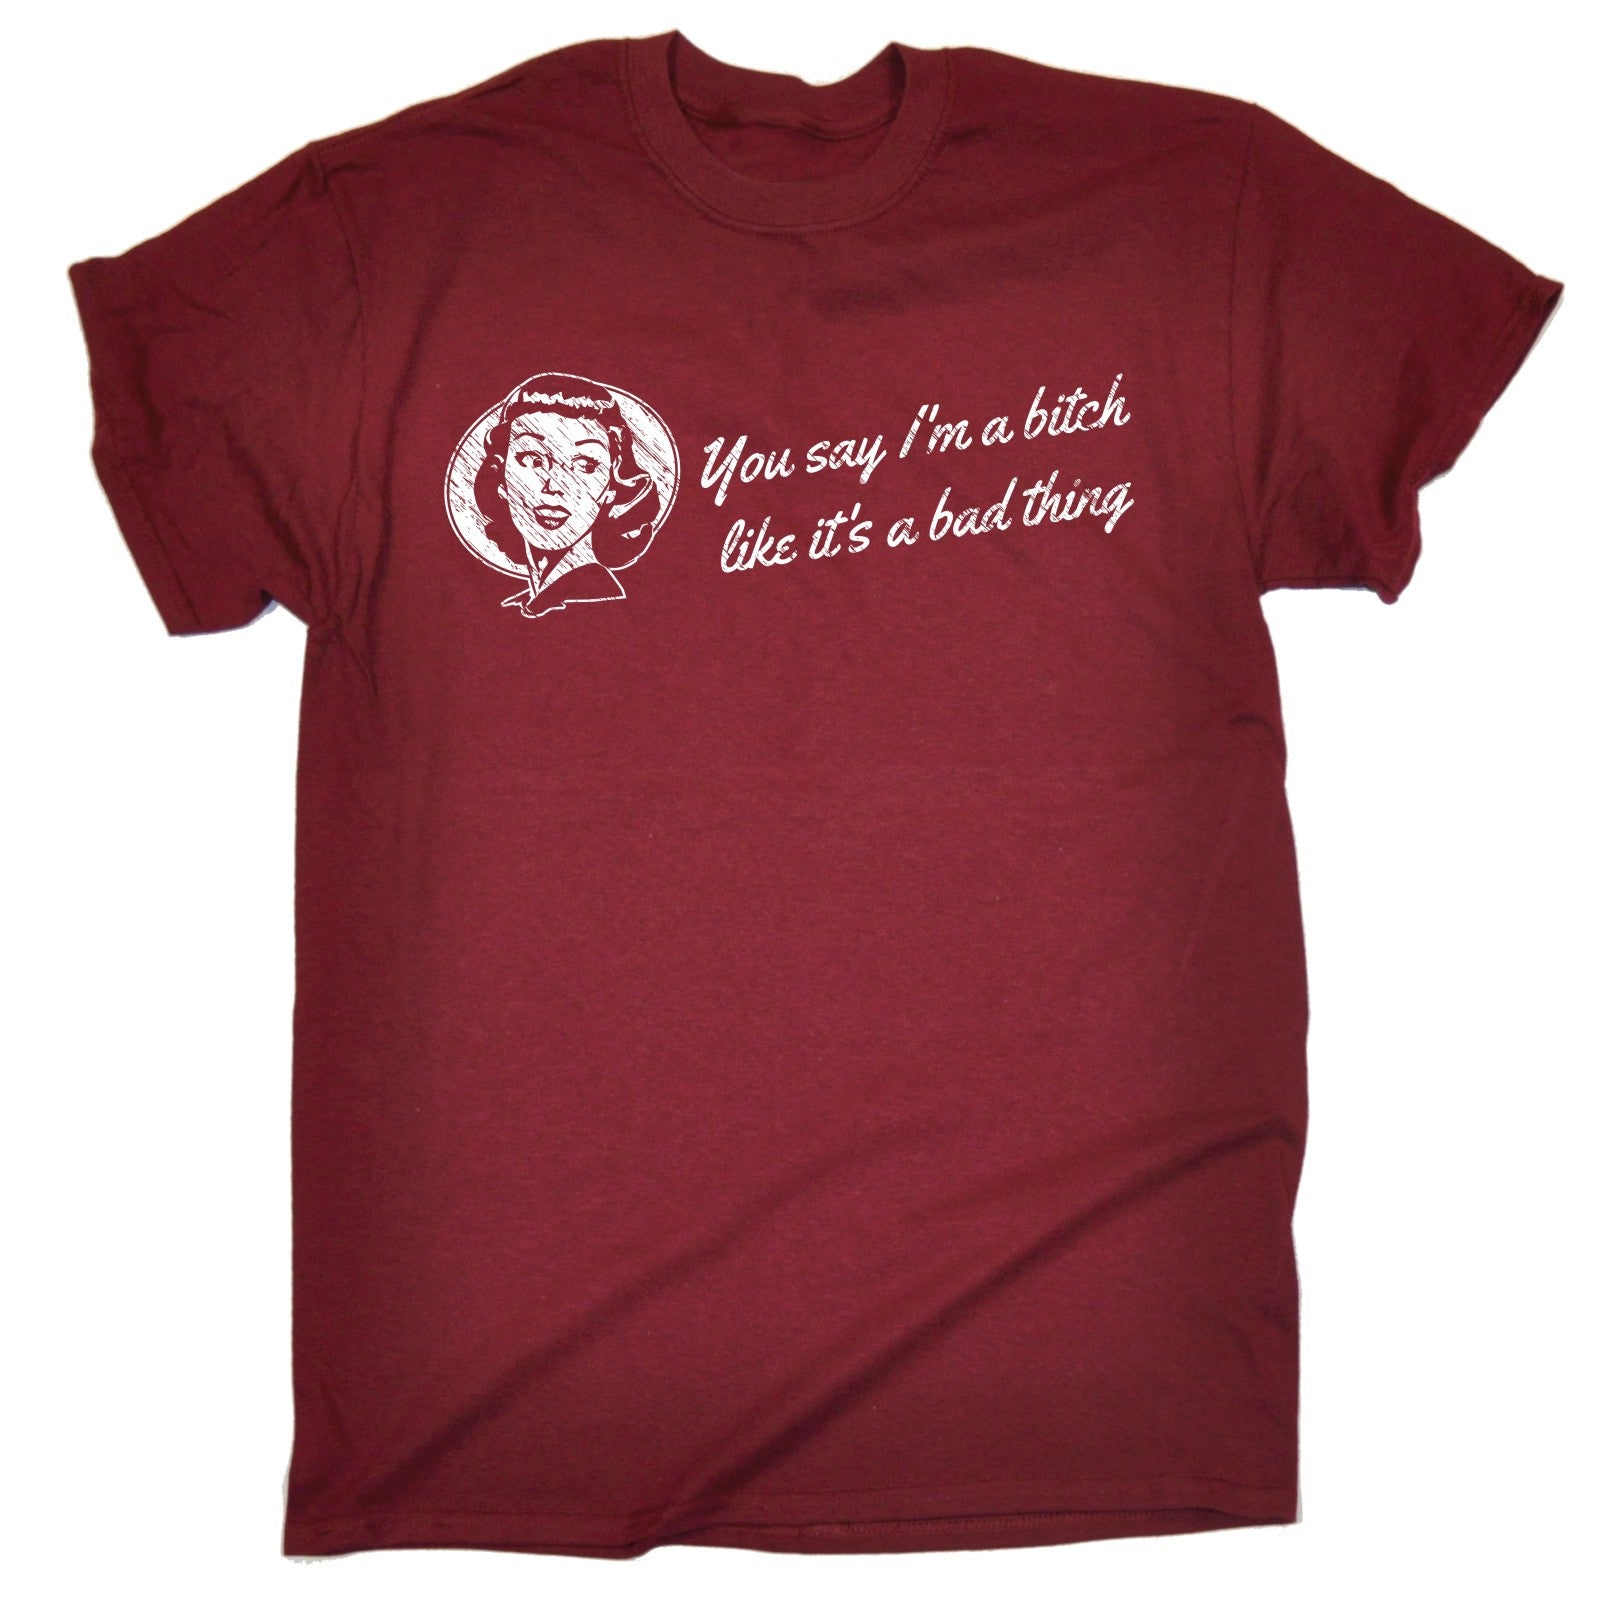 YOU SAY IM A BITCH LIKE ITS A BAD THING T-SHIRT humour gift funny ...